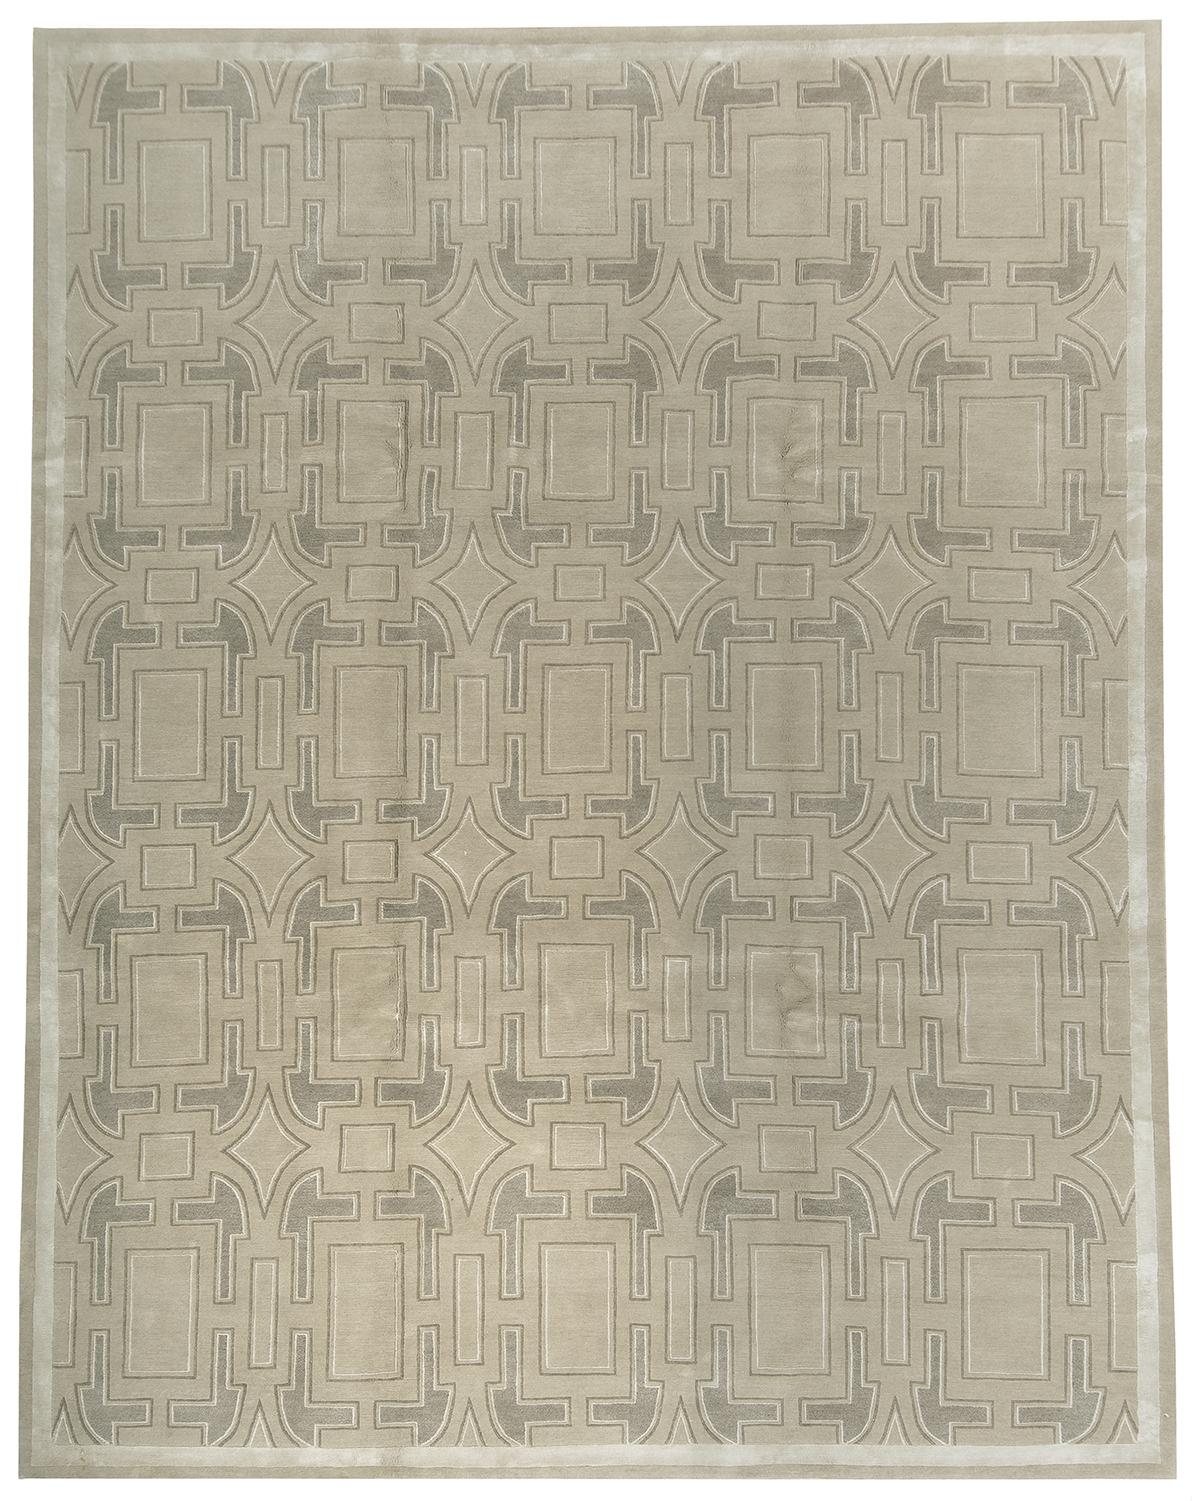 American Coverlet (96587)image